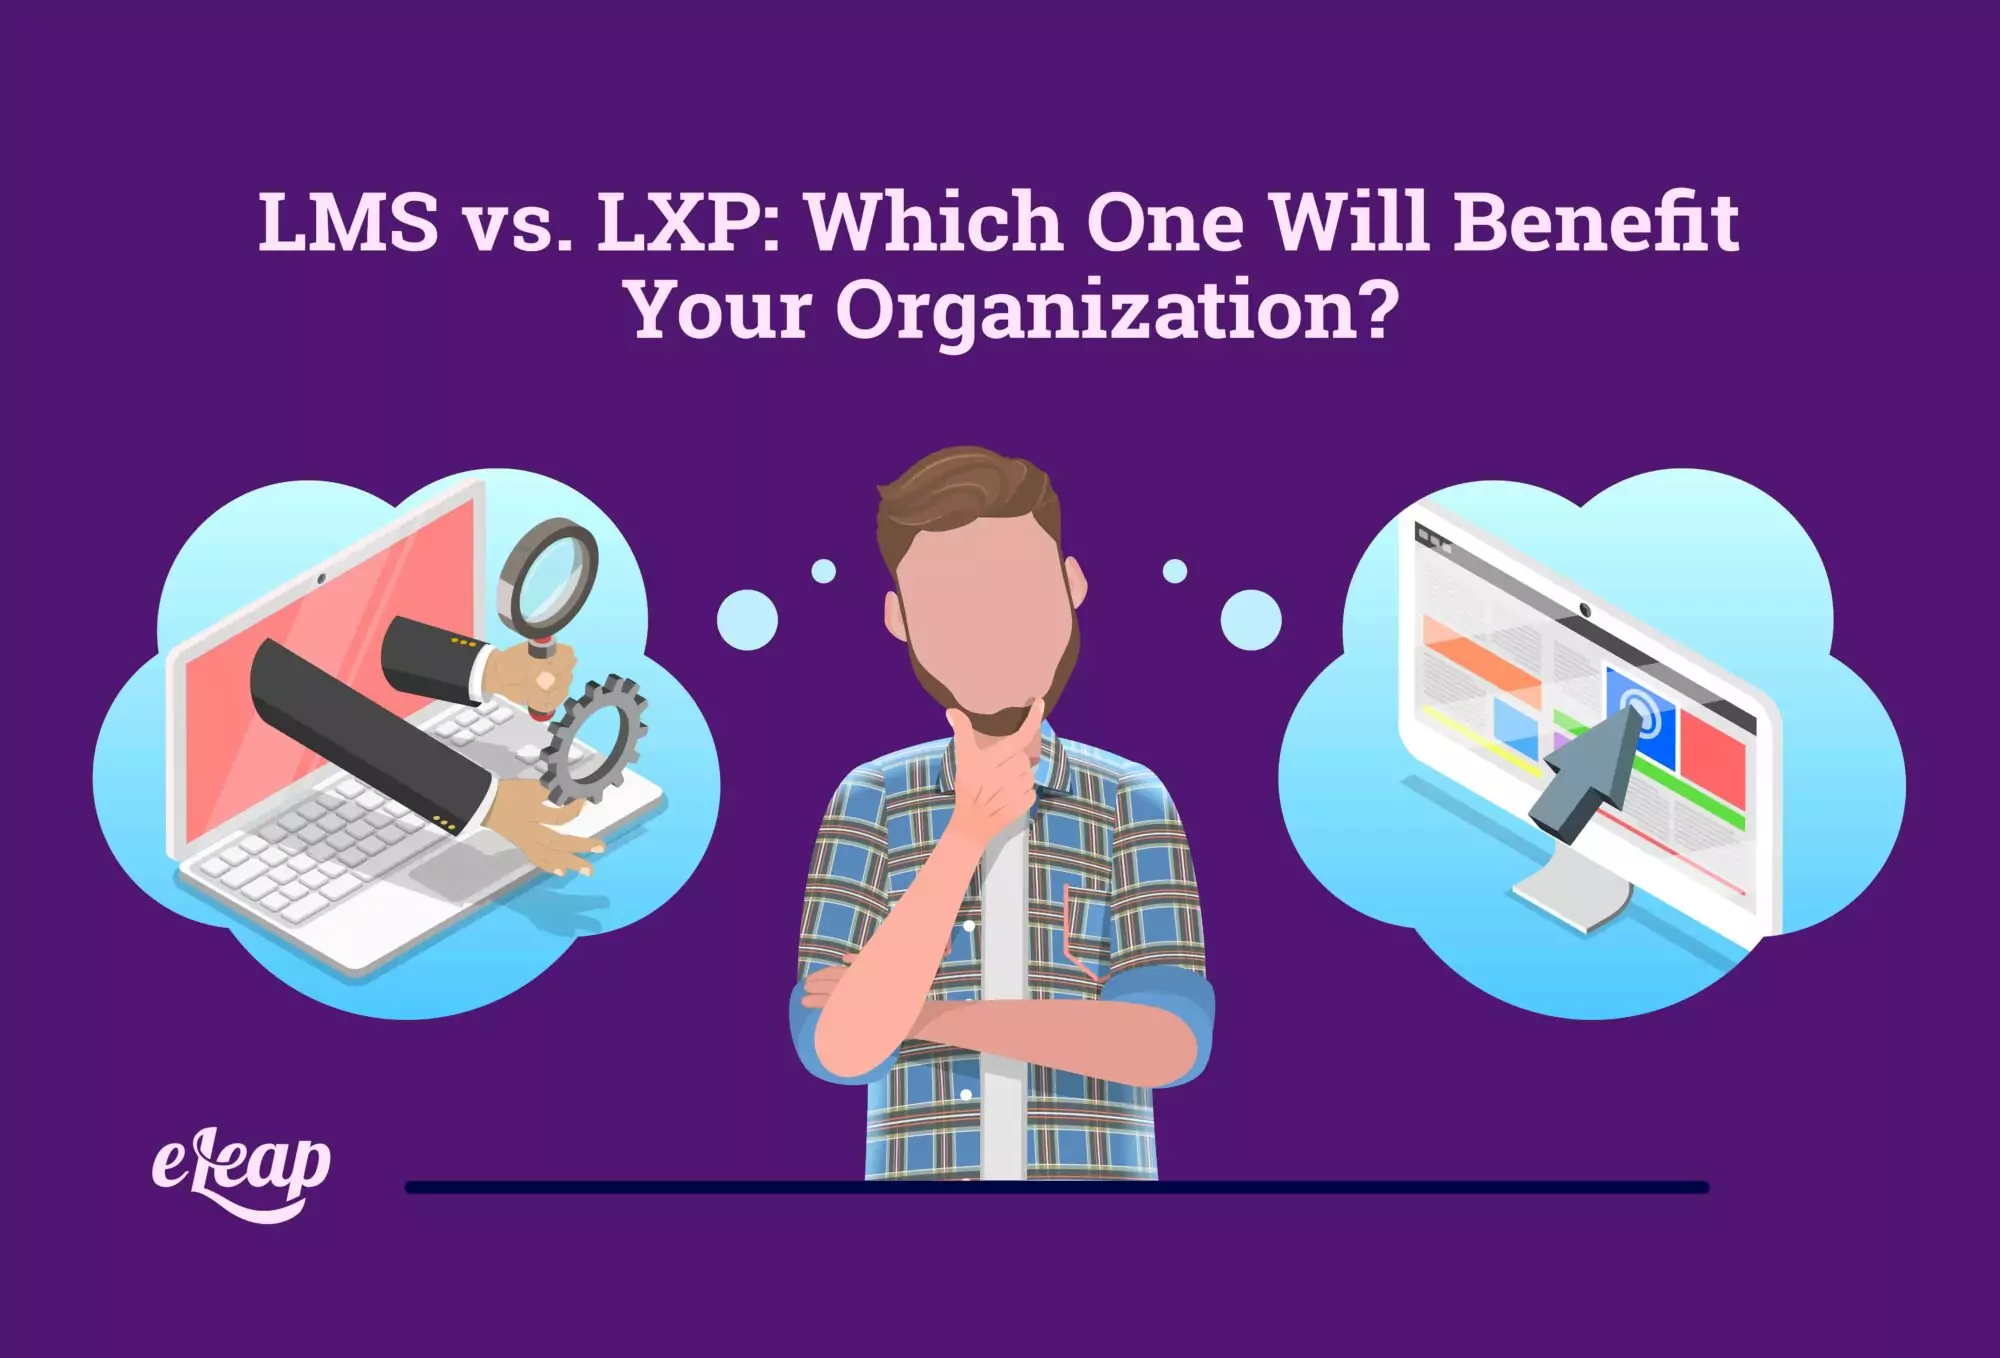 LMS vs. LXP: What One Will Benefit Your Organization?